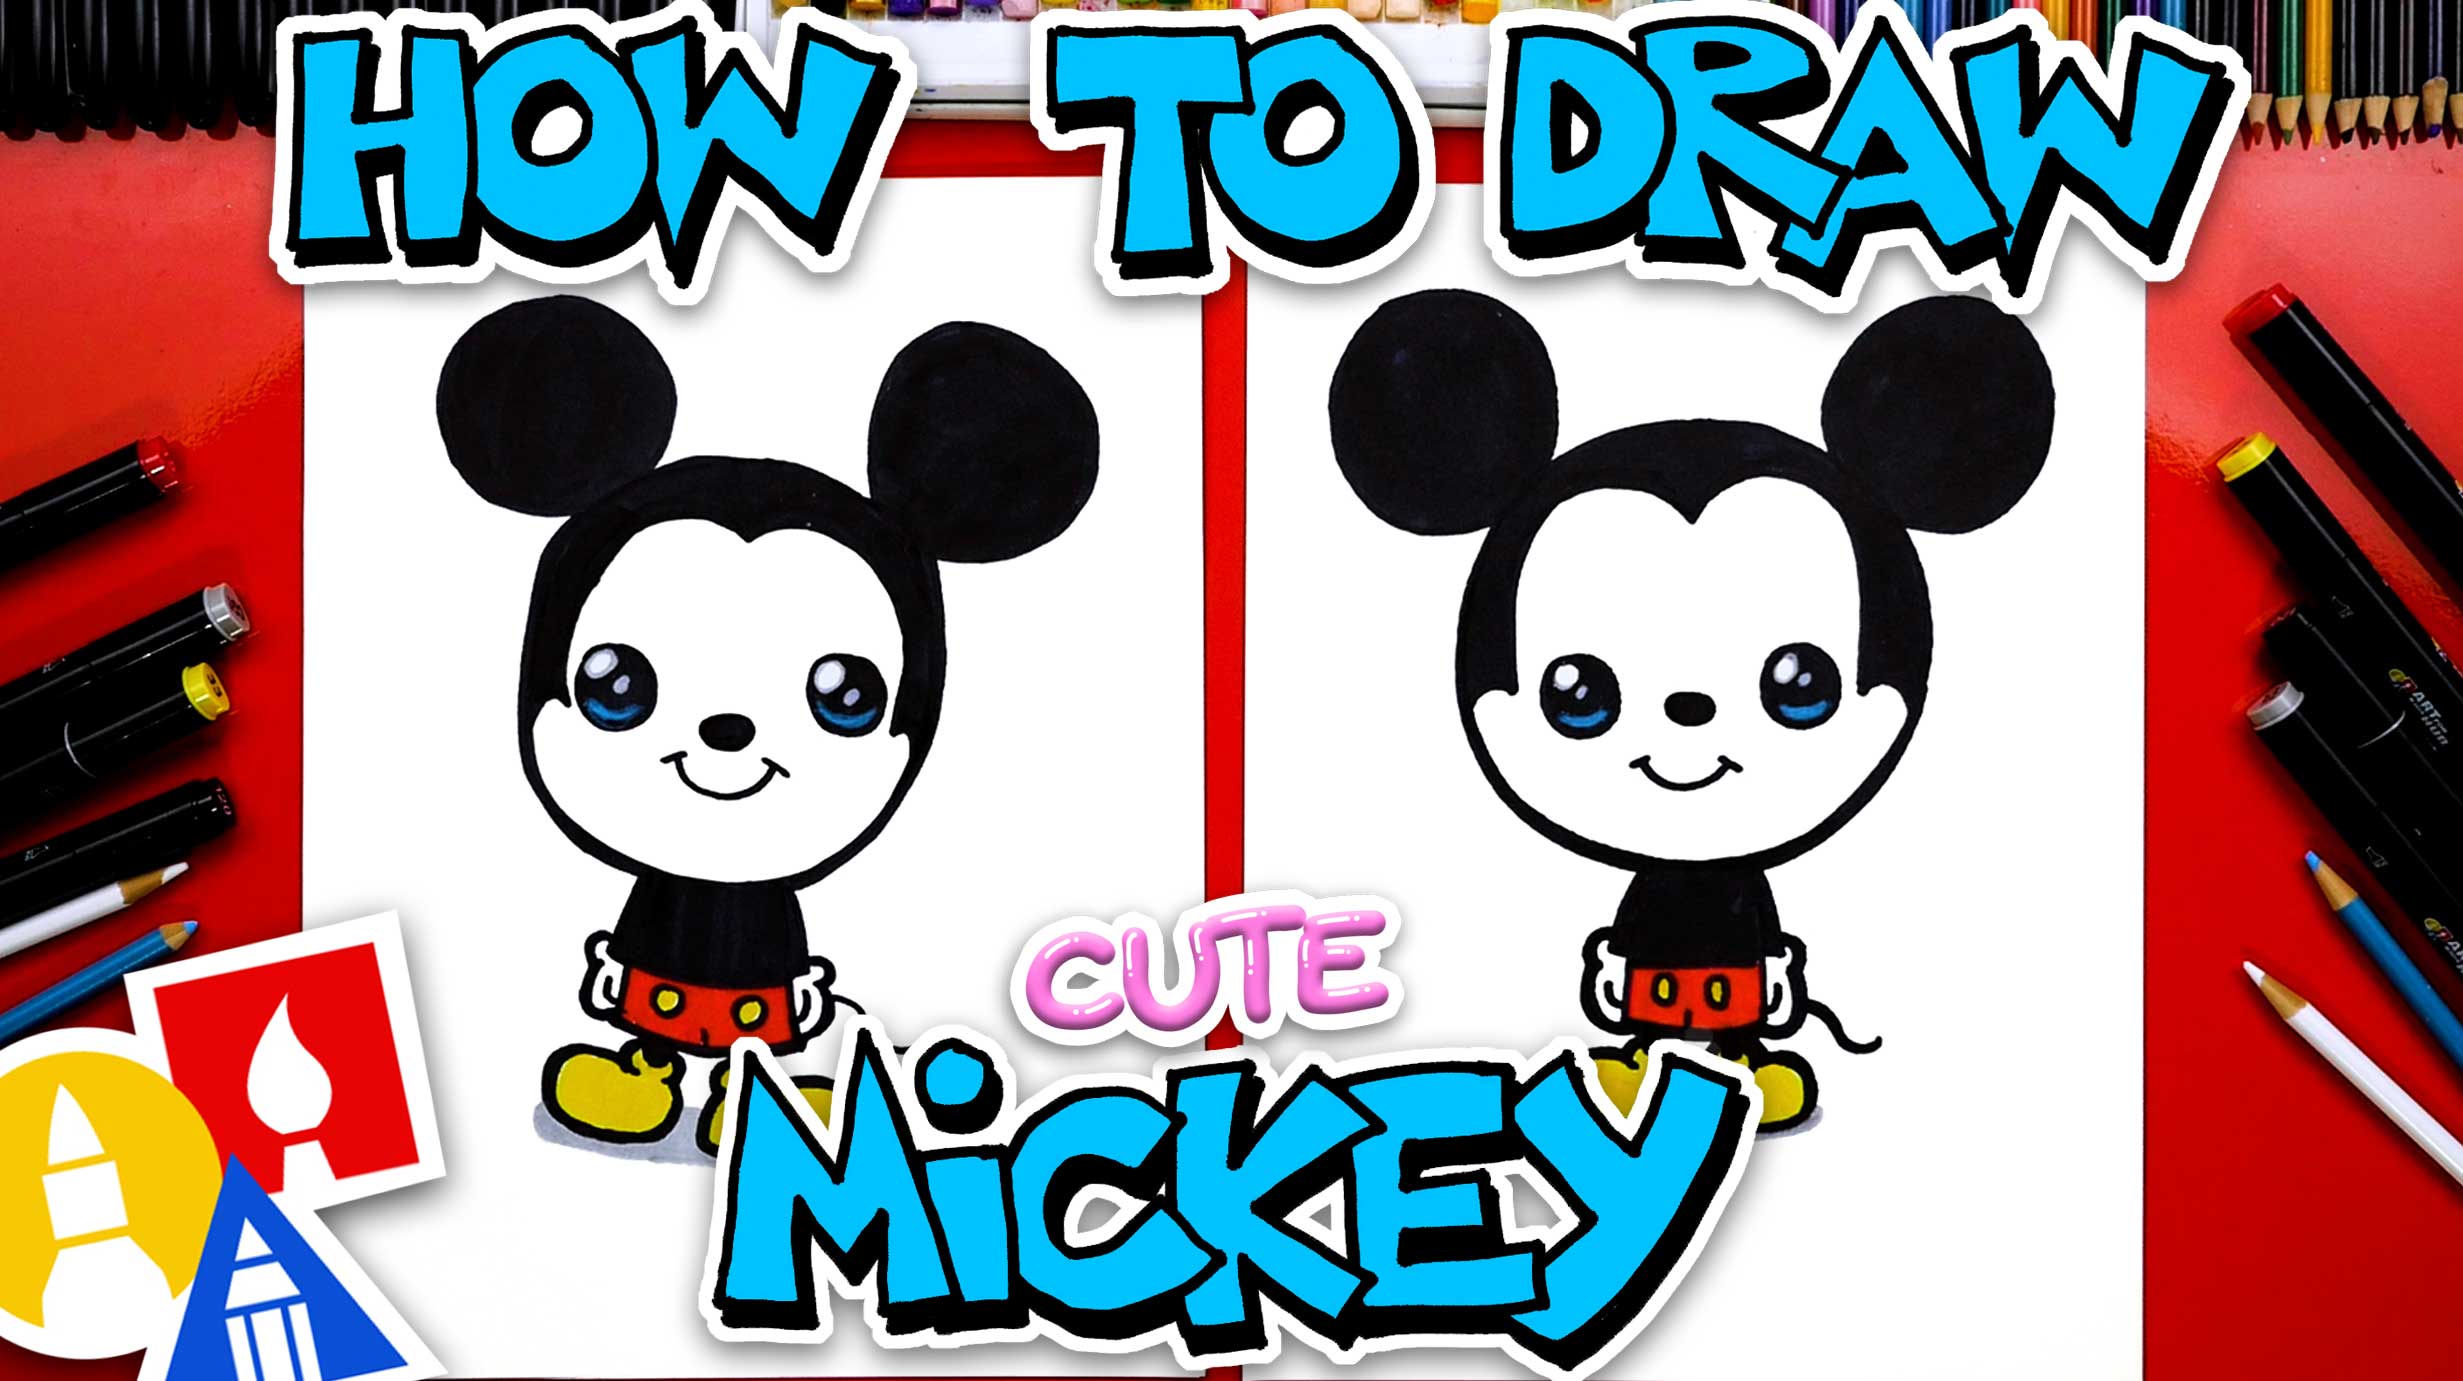 How to draw a MICKEY MOUSE easy step by step | Easy Drawing Tutorial -  YouTube-saigonsouth.com.vn